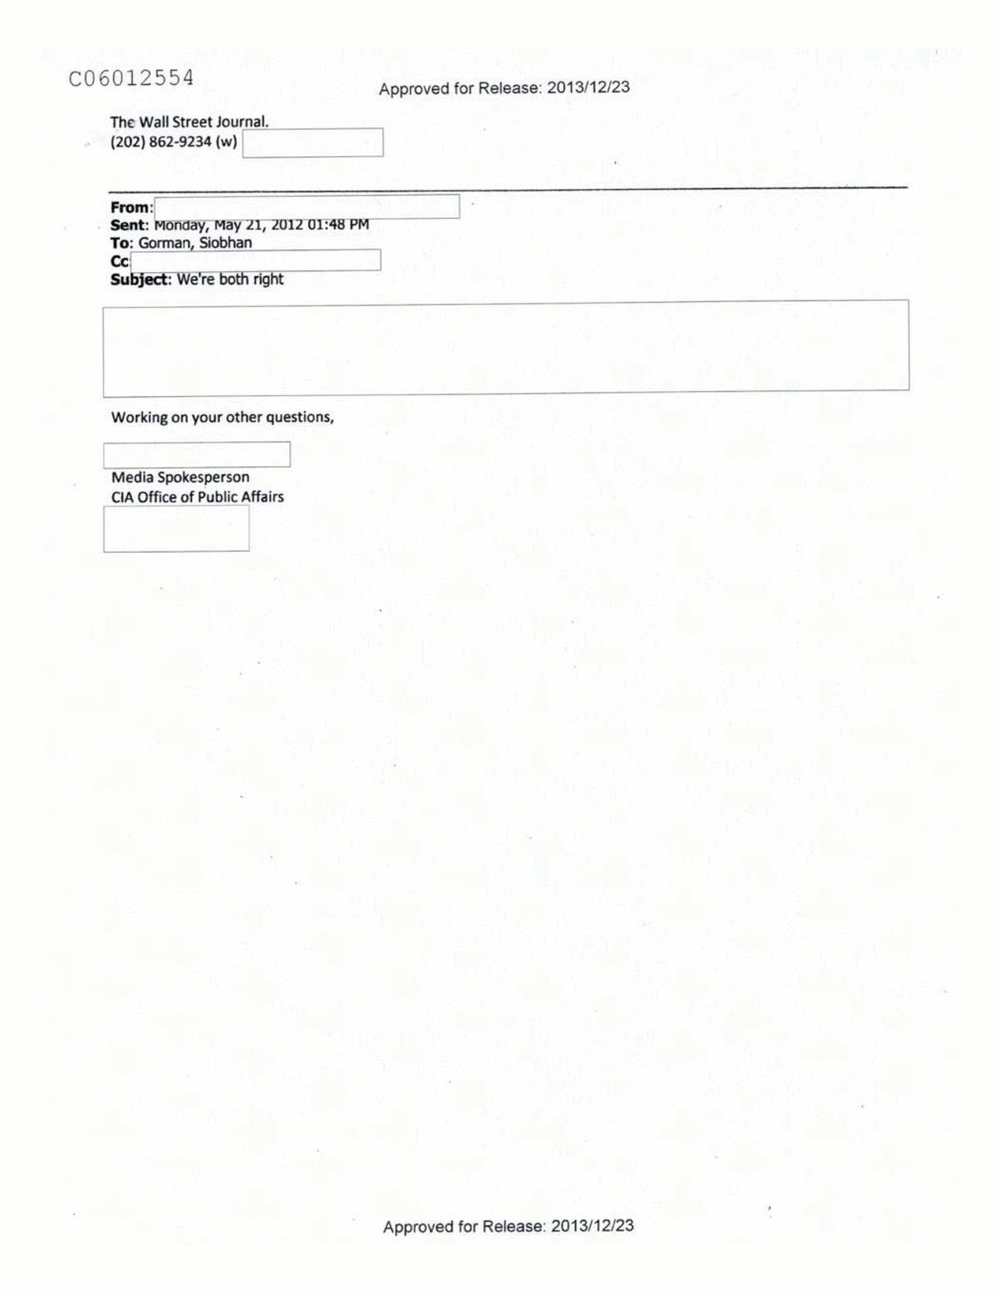 Page 93 from Email Correspondence Between Reporters and CIA Flacks